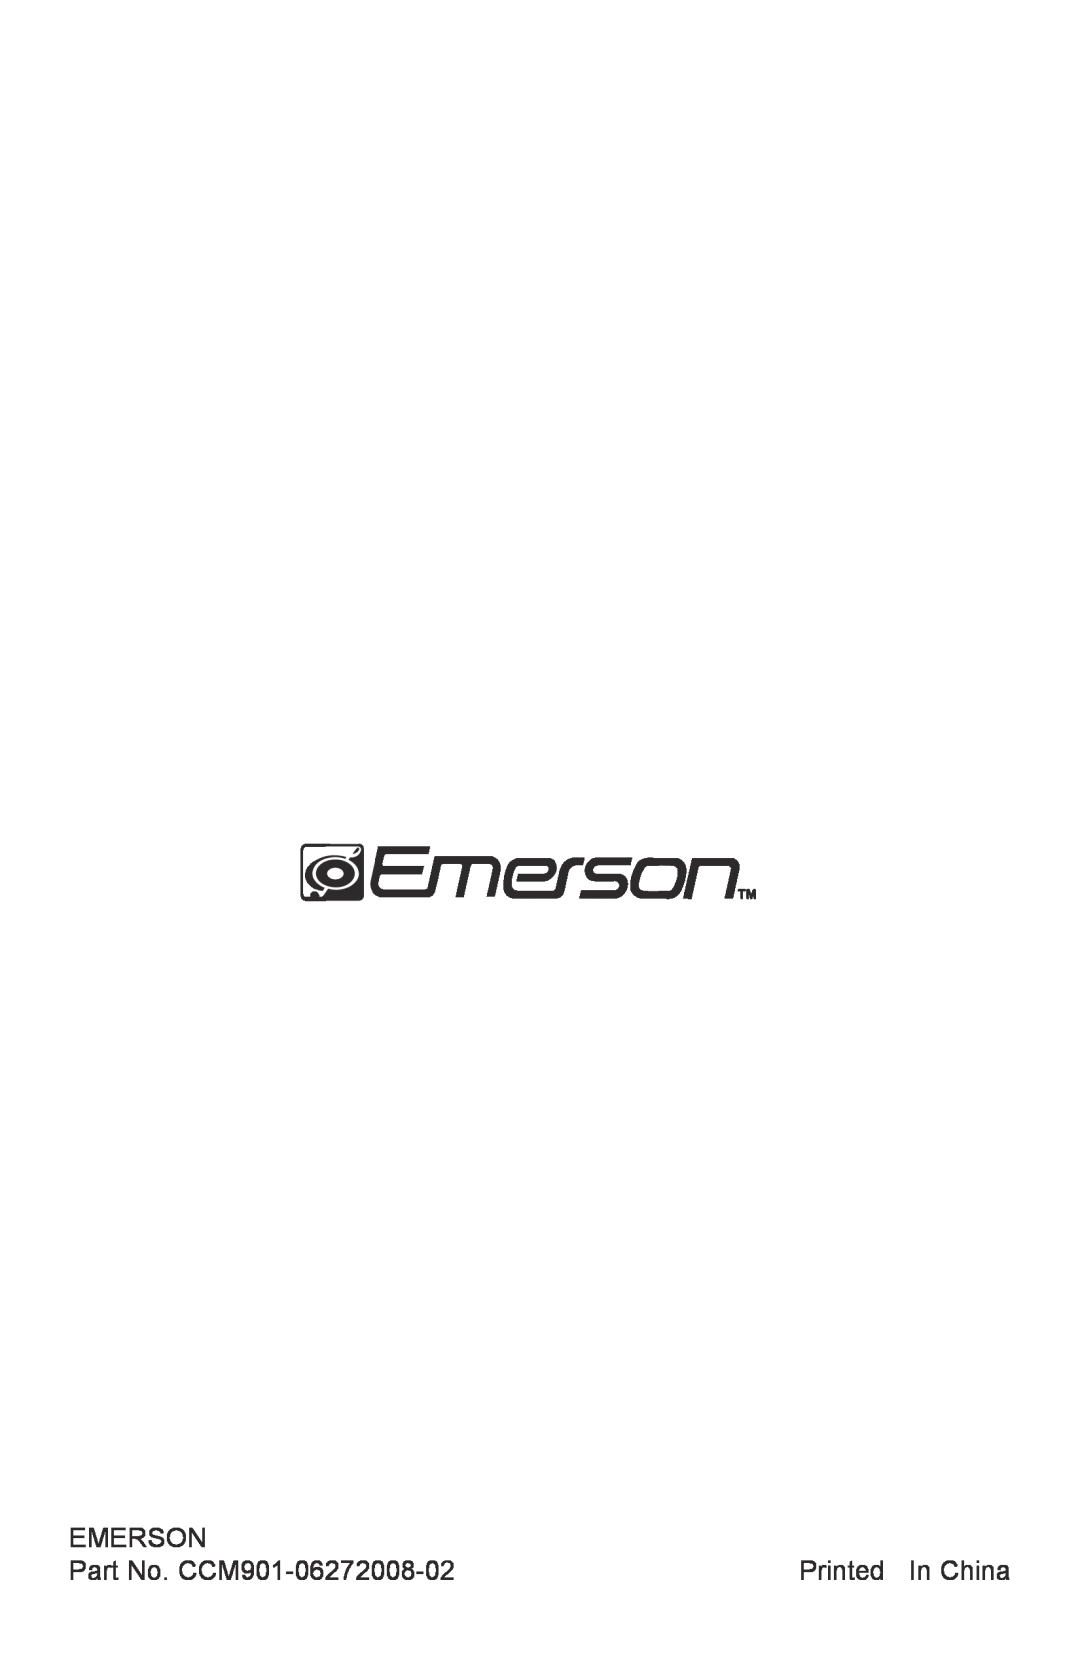 Emerson manual Emerson, Part No. CCM901-06272008-02, Printed In China 